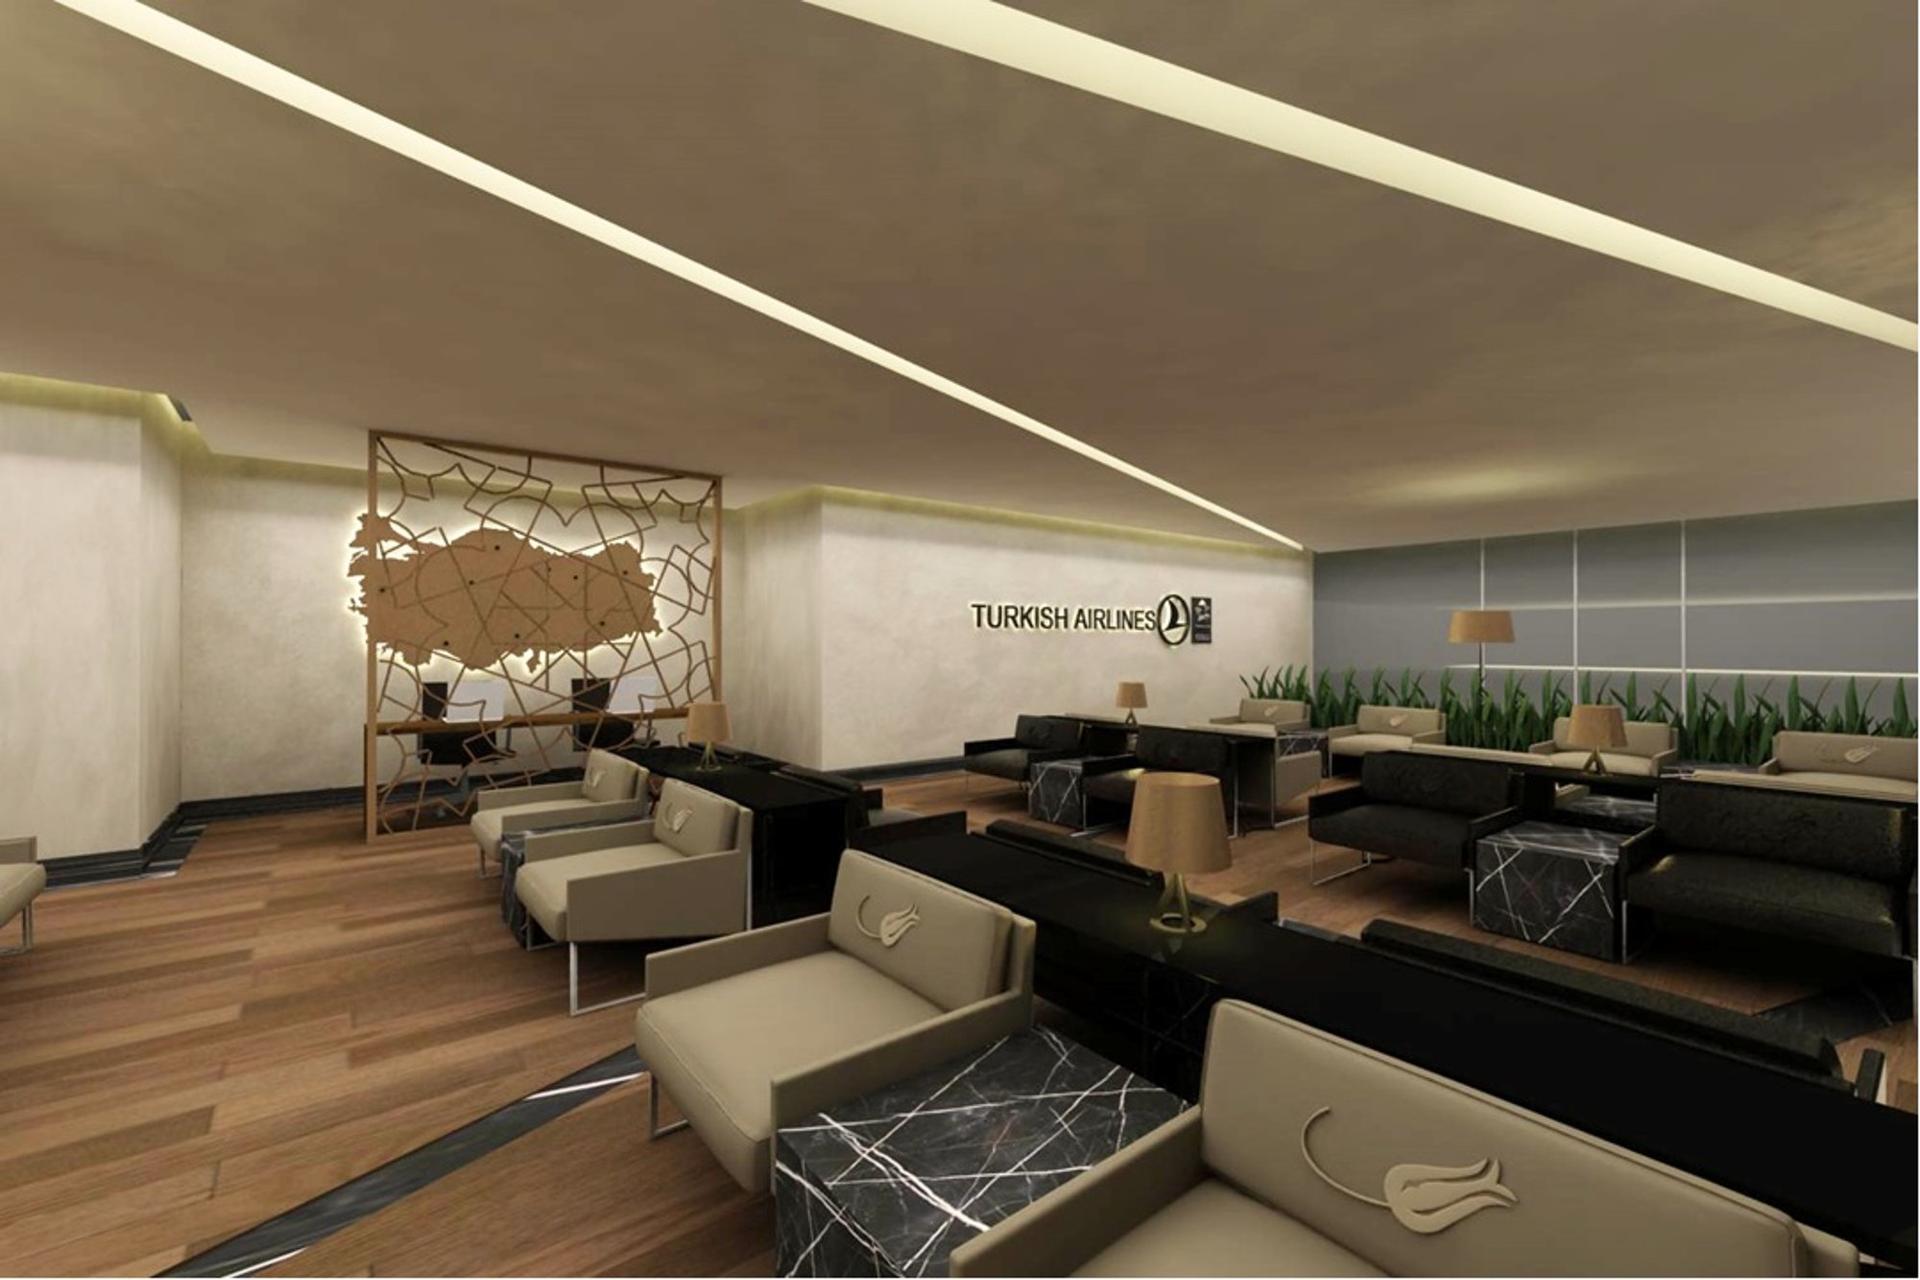 Turkish Airlines CIP Lounge (Business Lounge) image 2 of 27